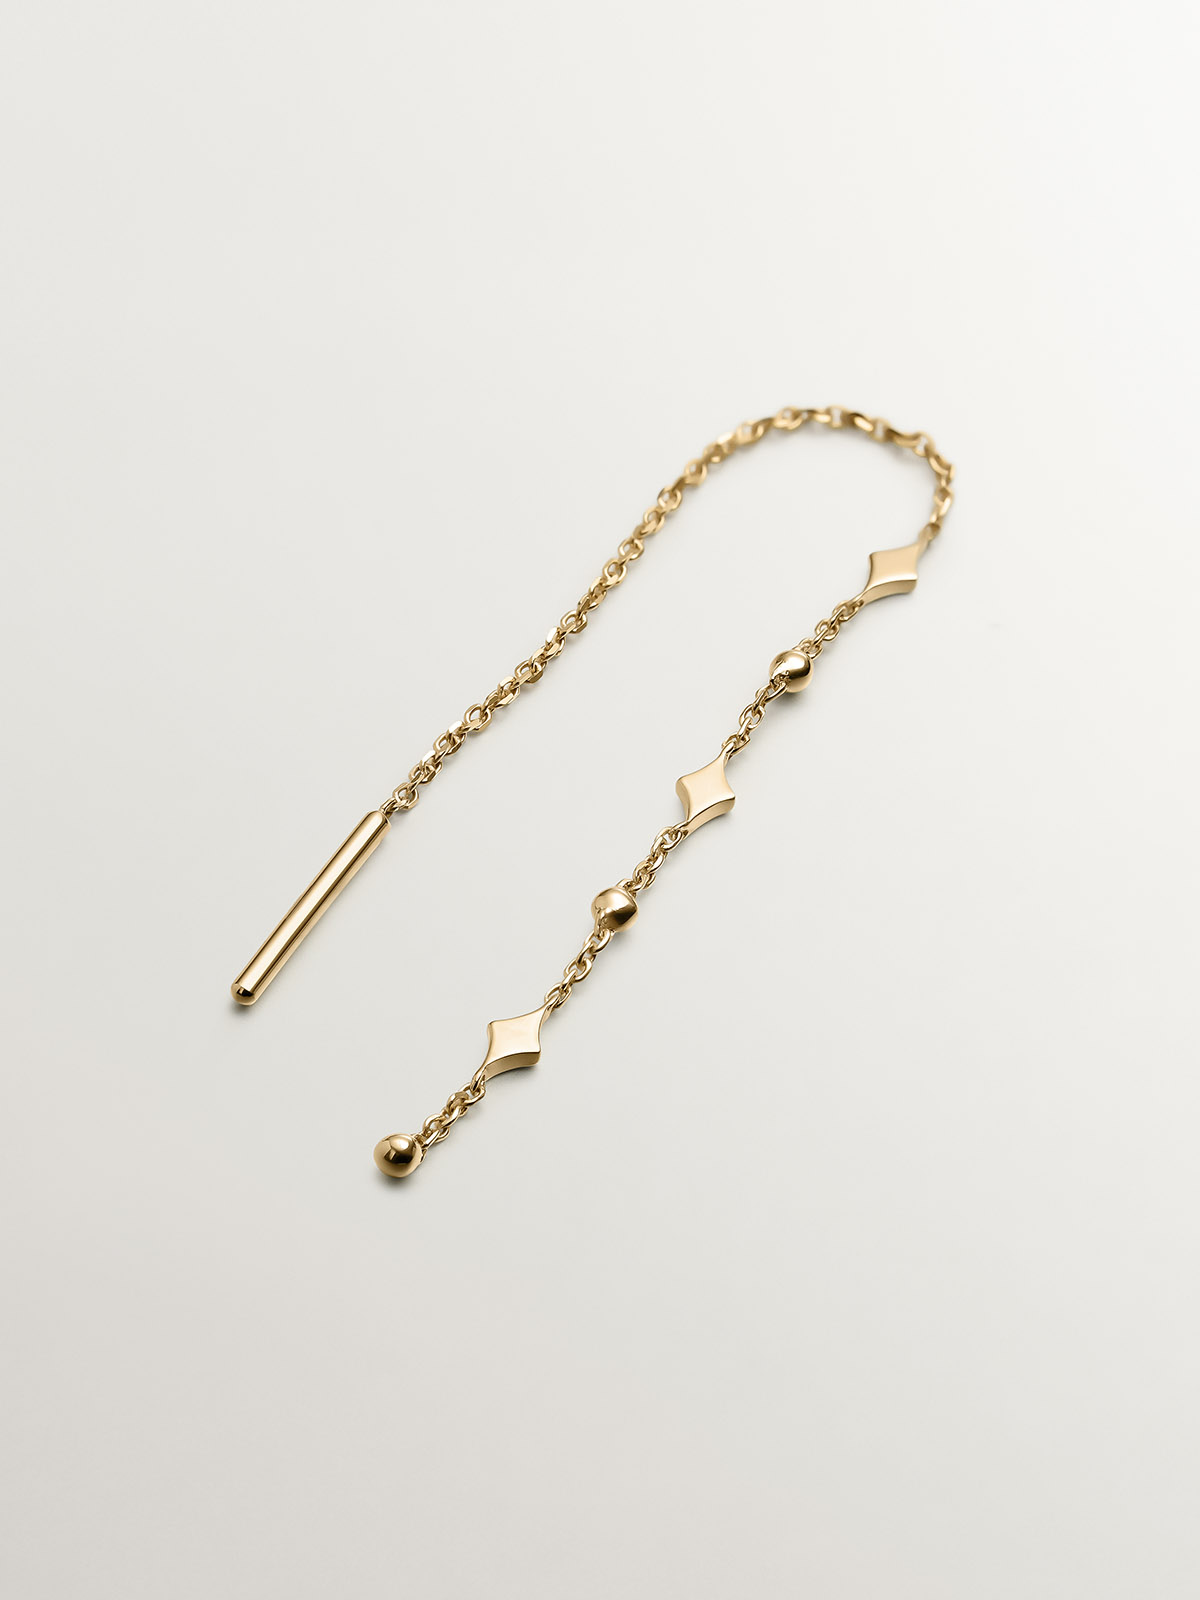 Single 9K yellow gold earring with chain and motifs.